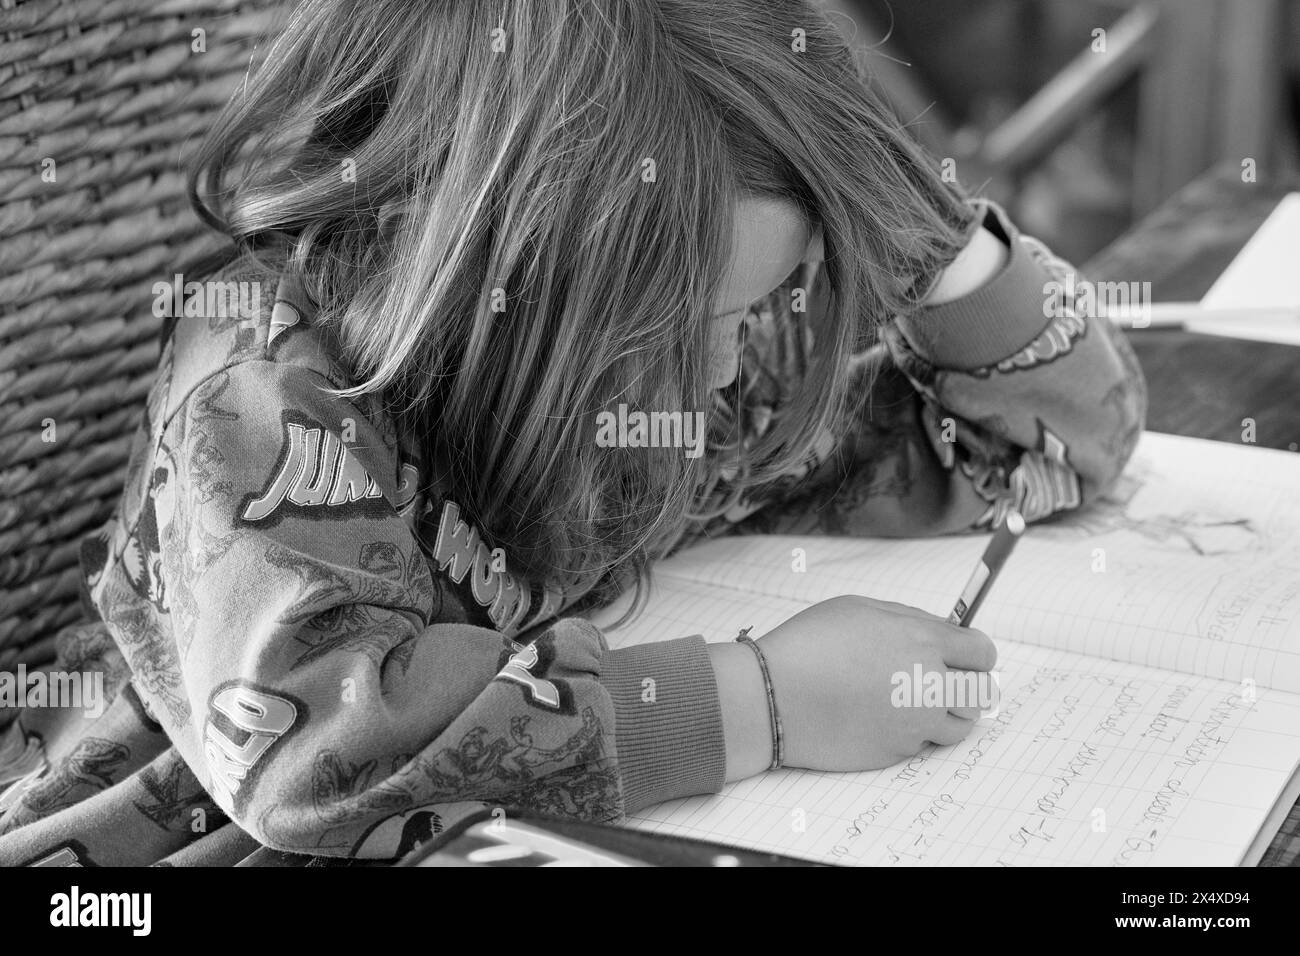 Italy, Sicily; 8 years old male child doing his homework on a table at home Stock Photo